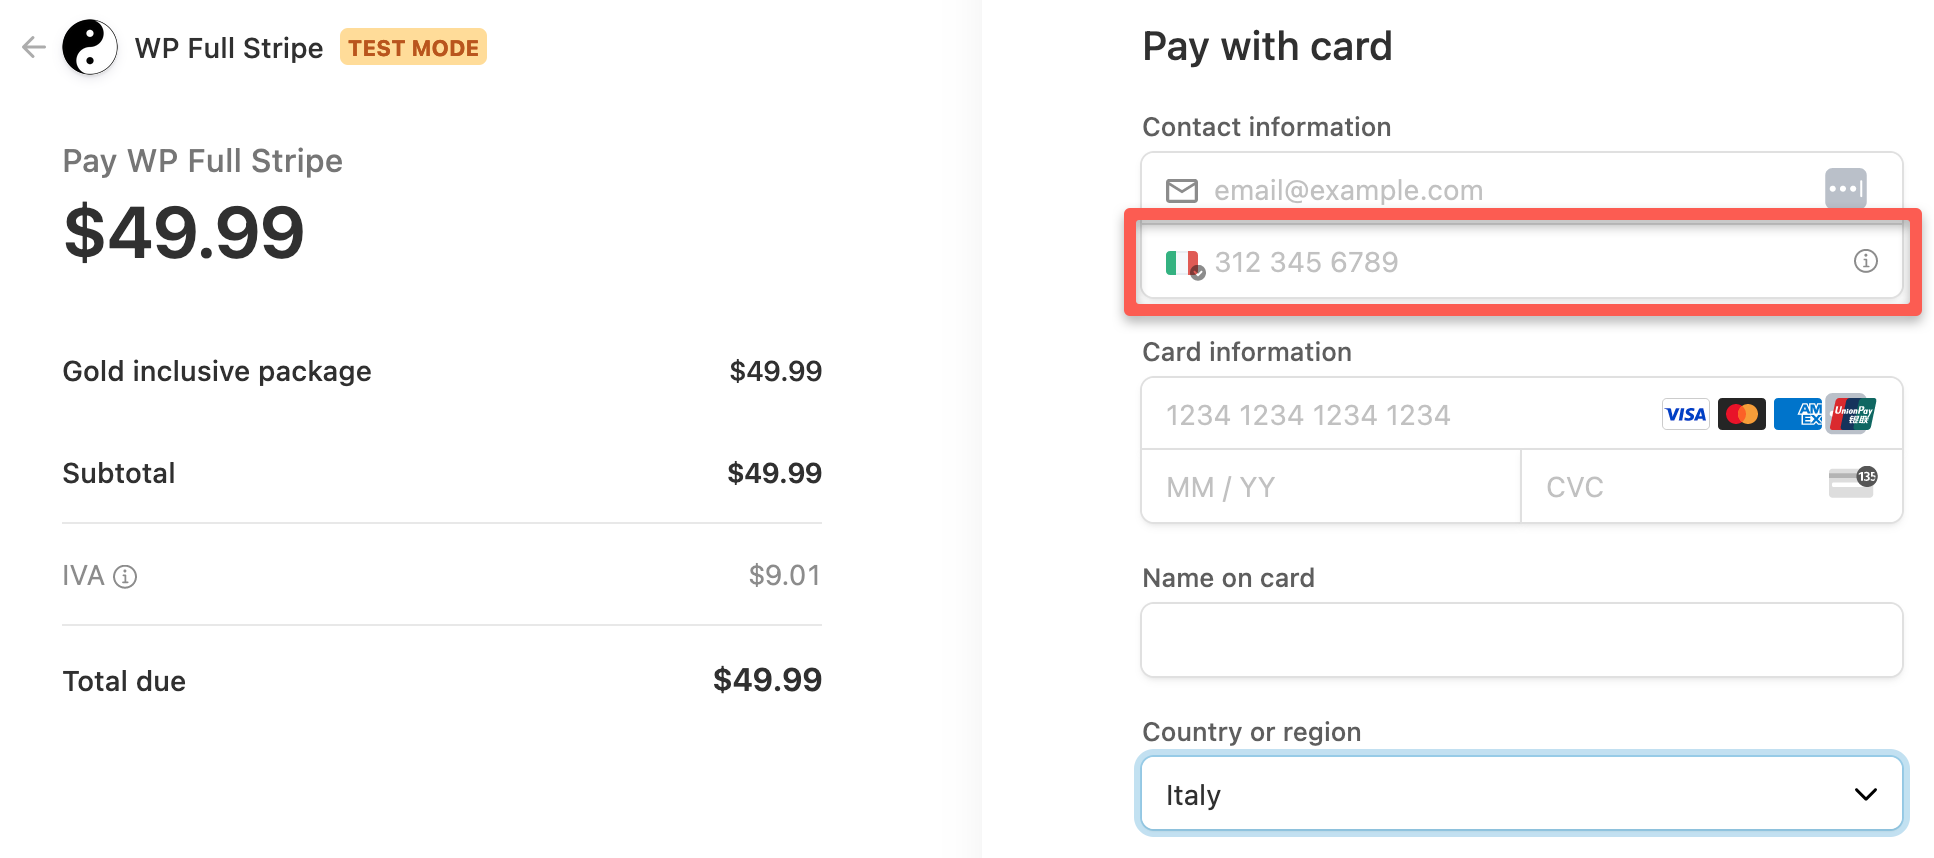 Collecting the phone number field can be enabled for checkout forms of WP Full Pay